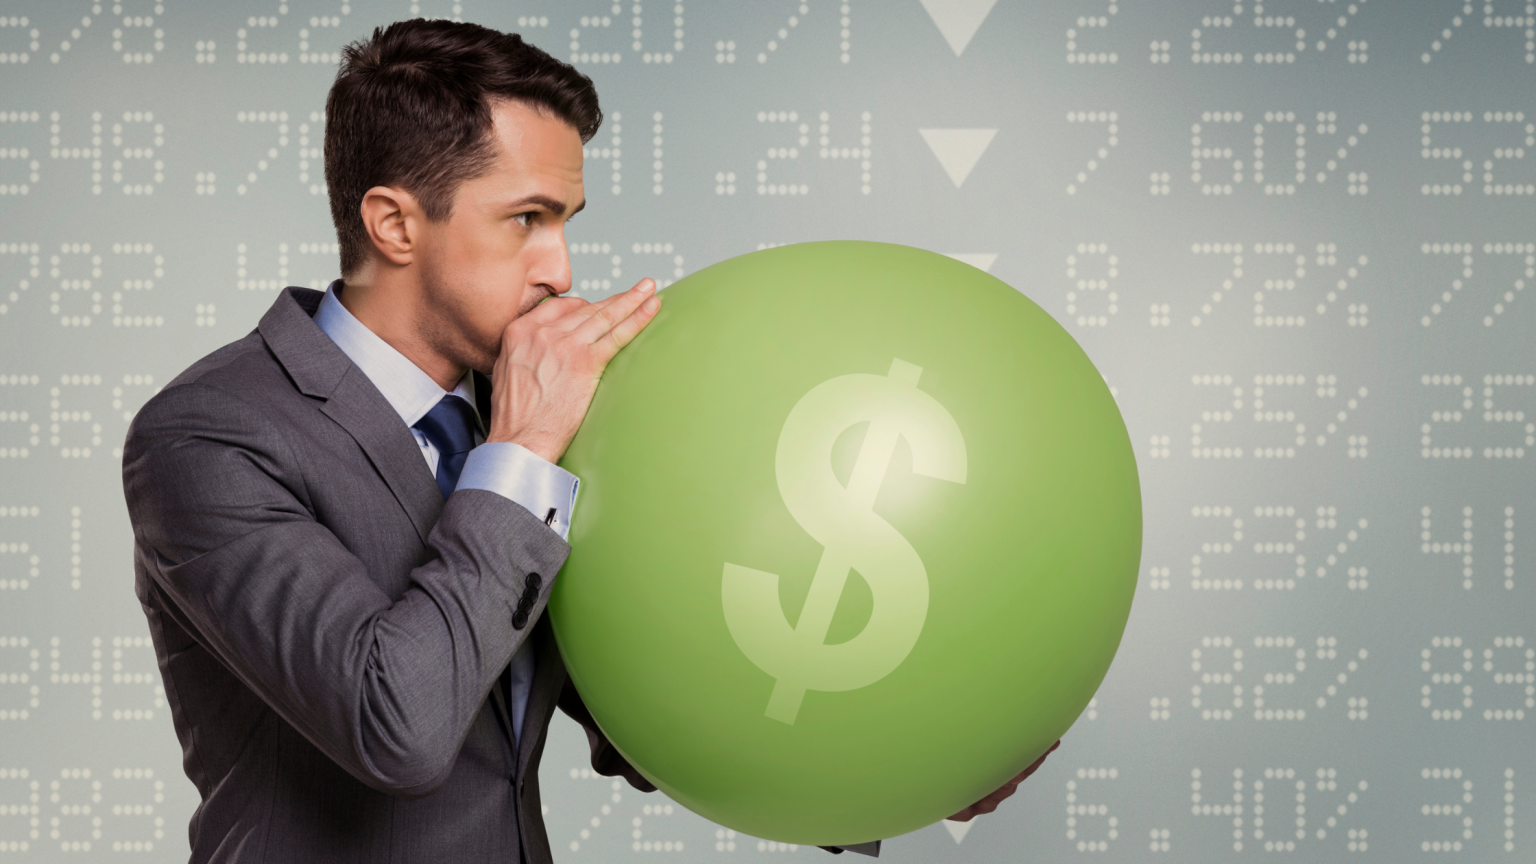 Business man blowing up green ballon with dollar sign symbol on it. Percentages and numbers in the background with down arrows.